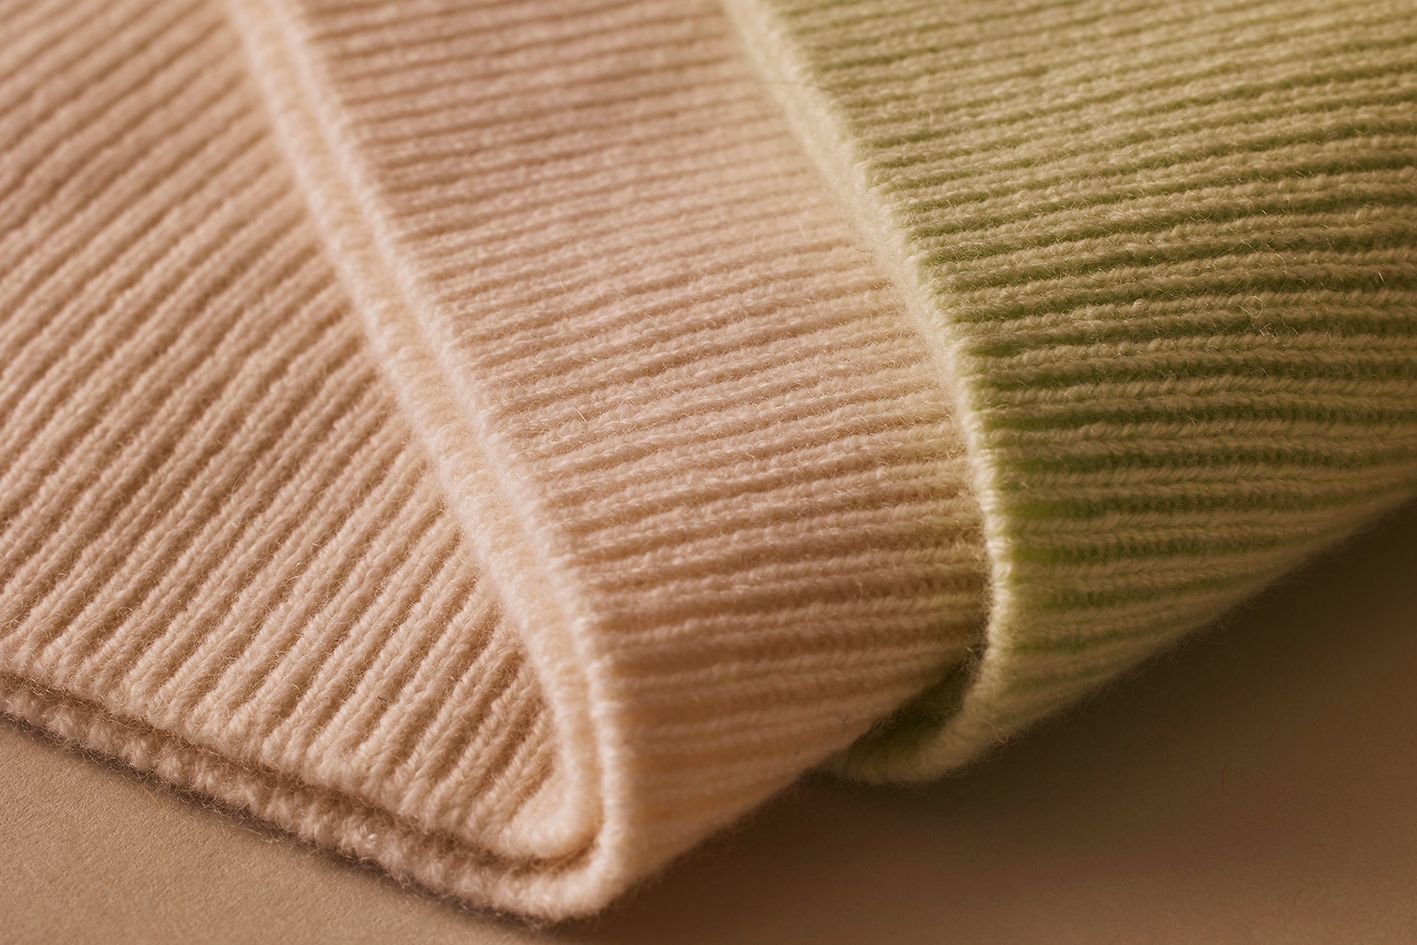 Scanlan Theodore cashmere with close detailed view of fabrics ribbed texture.